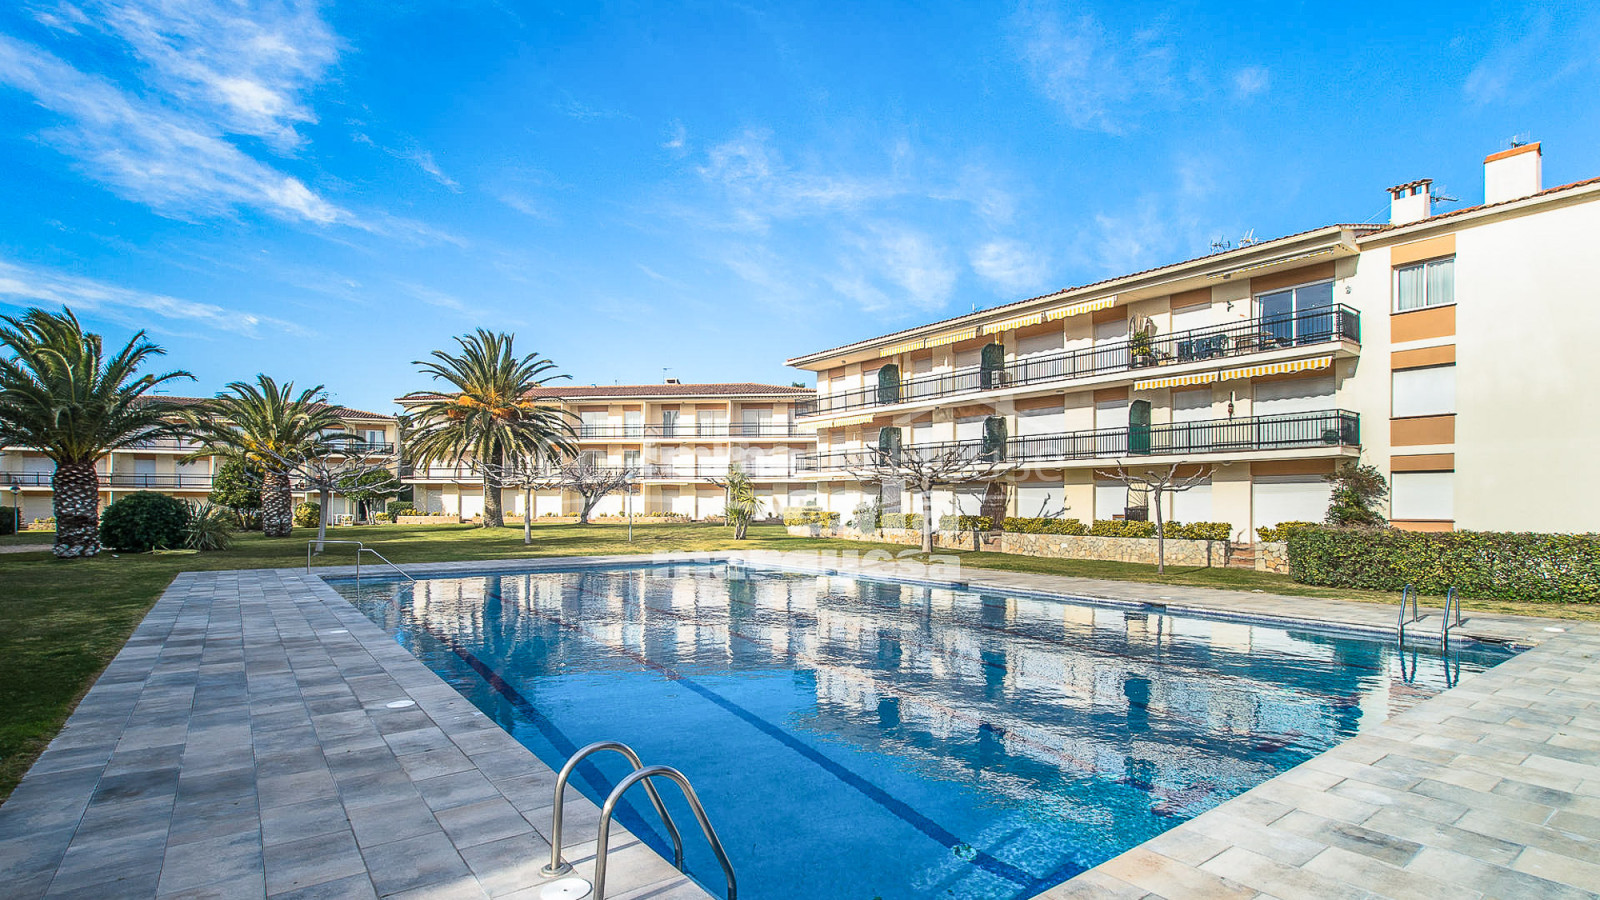 Apartment with terrace and pool in Calella de Palafrugell